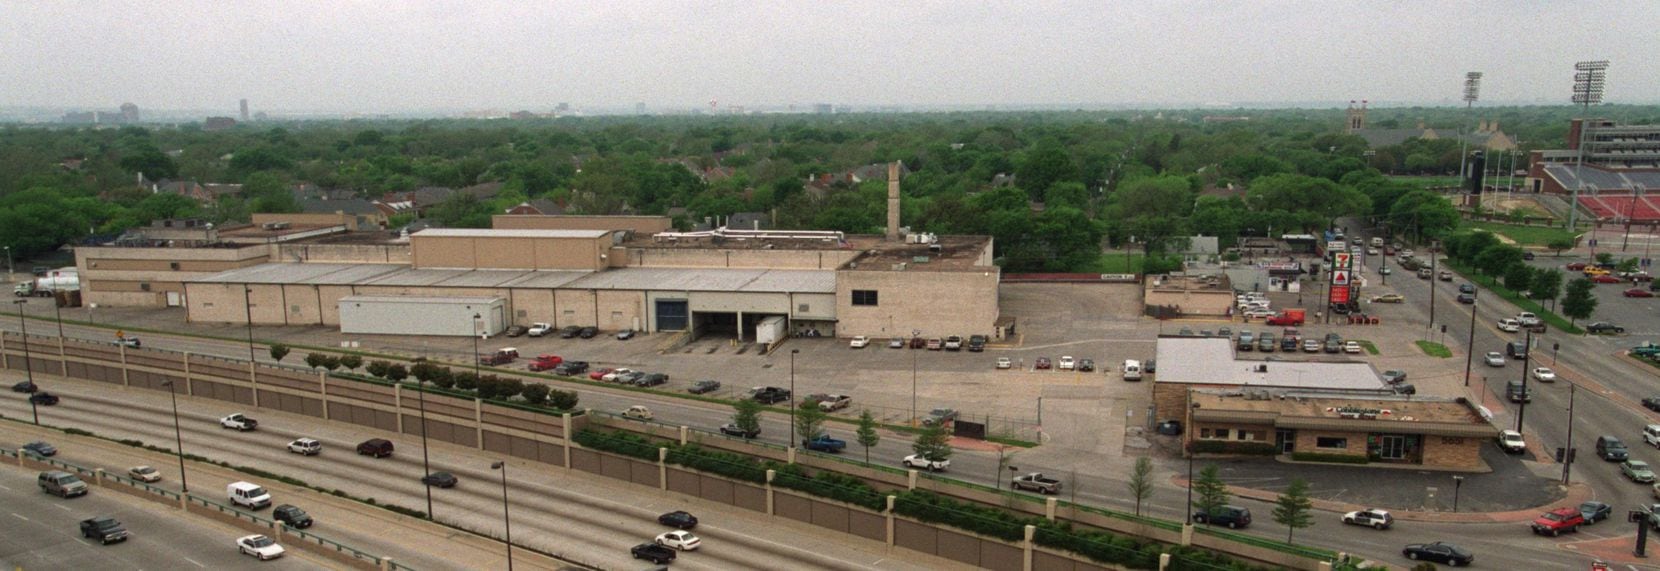 The Mrs. Baird's bread factory was at the southwest corner of Mockingbird Lane and Central Expressway. The southern end of the Southern Methodist University campus is at top right.